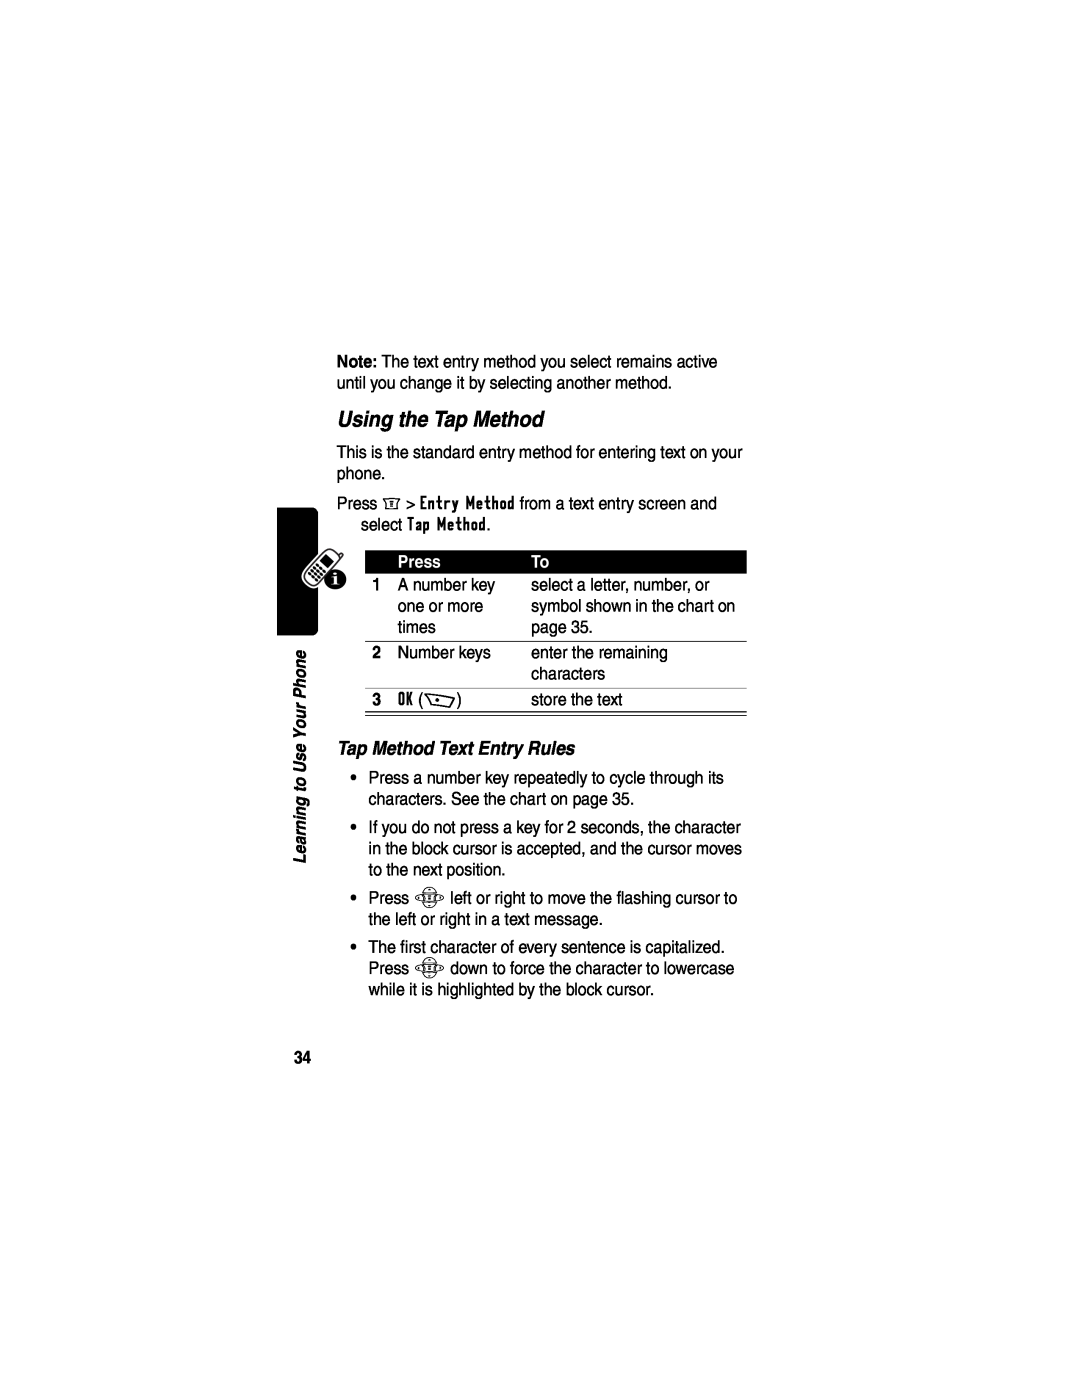 Motorola WIRELESS TELEPHONE manual Using the Tap Method, Tap Method Text Entry Rules, Press 